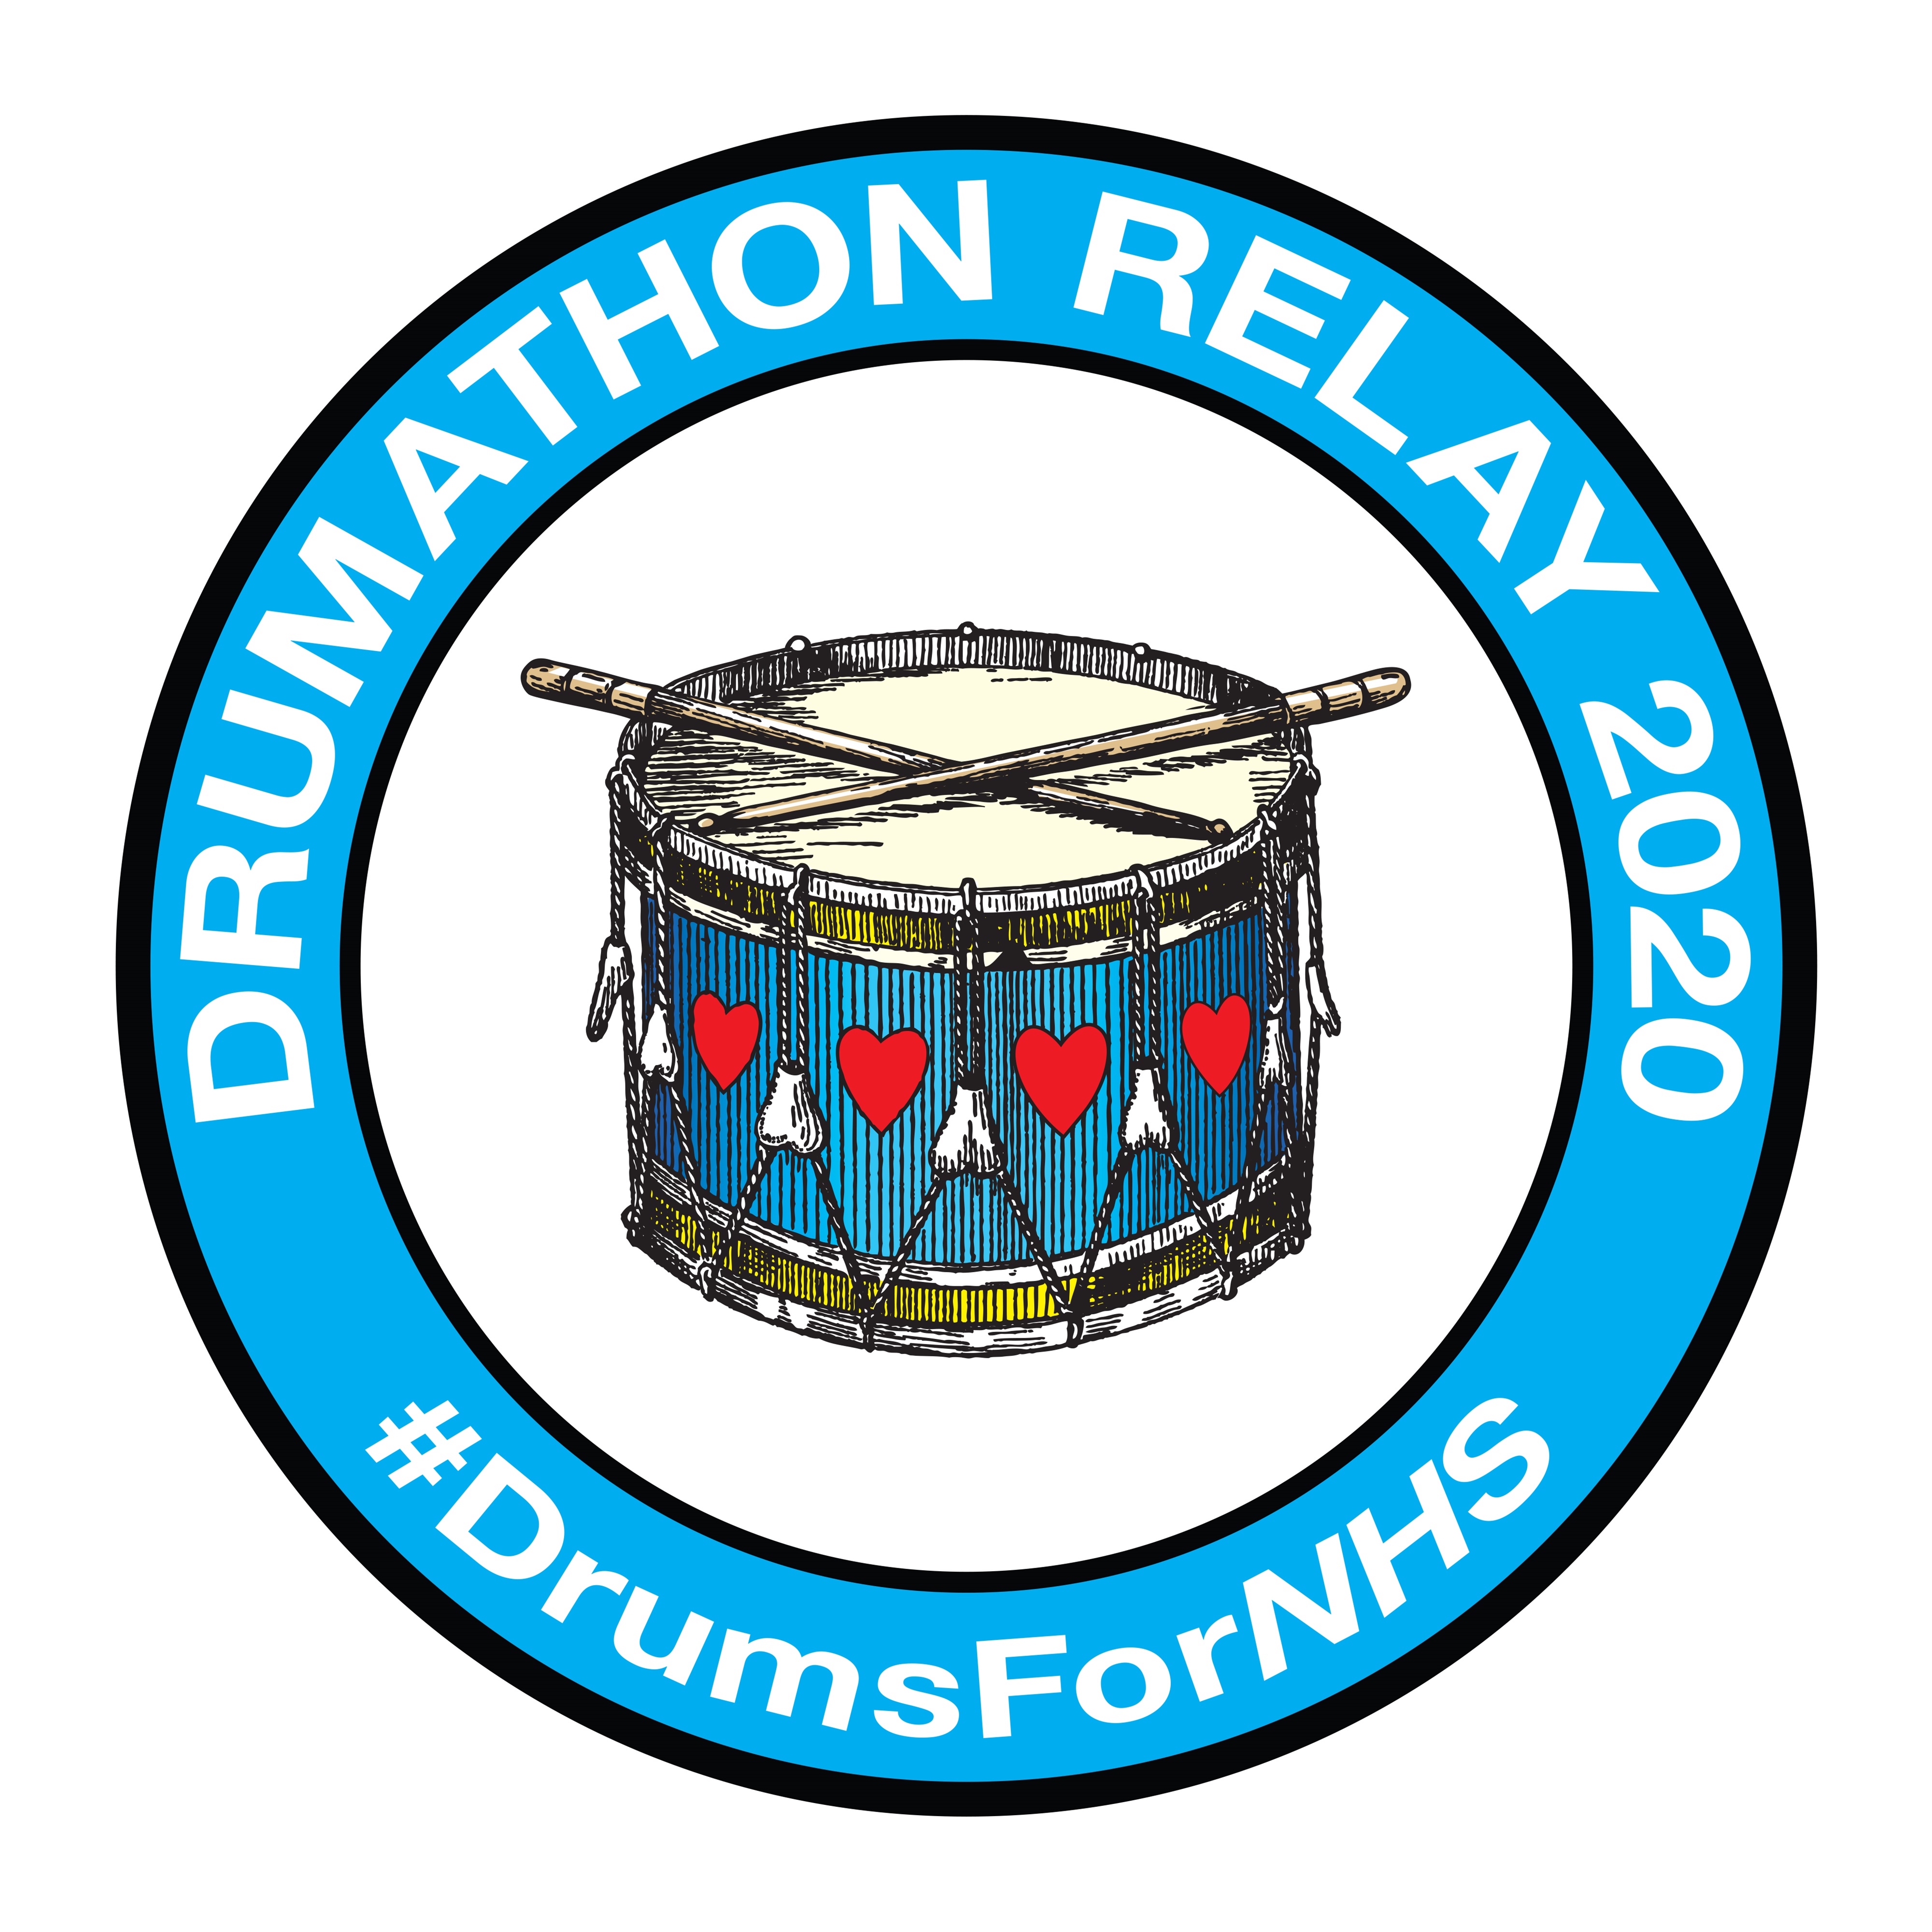 Drumathon 2020 Charity Auction - Drum for the NHS